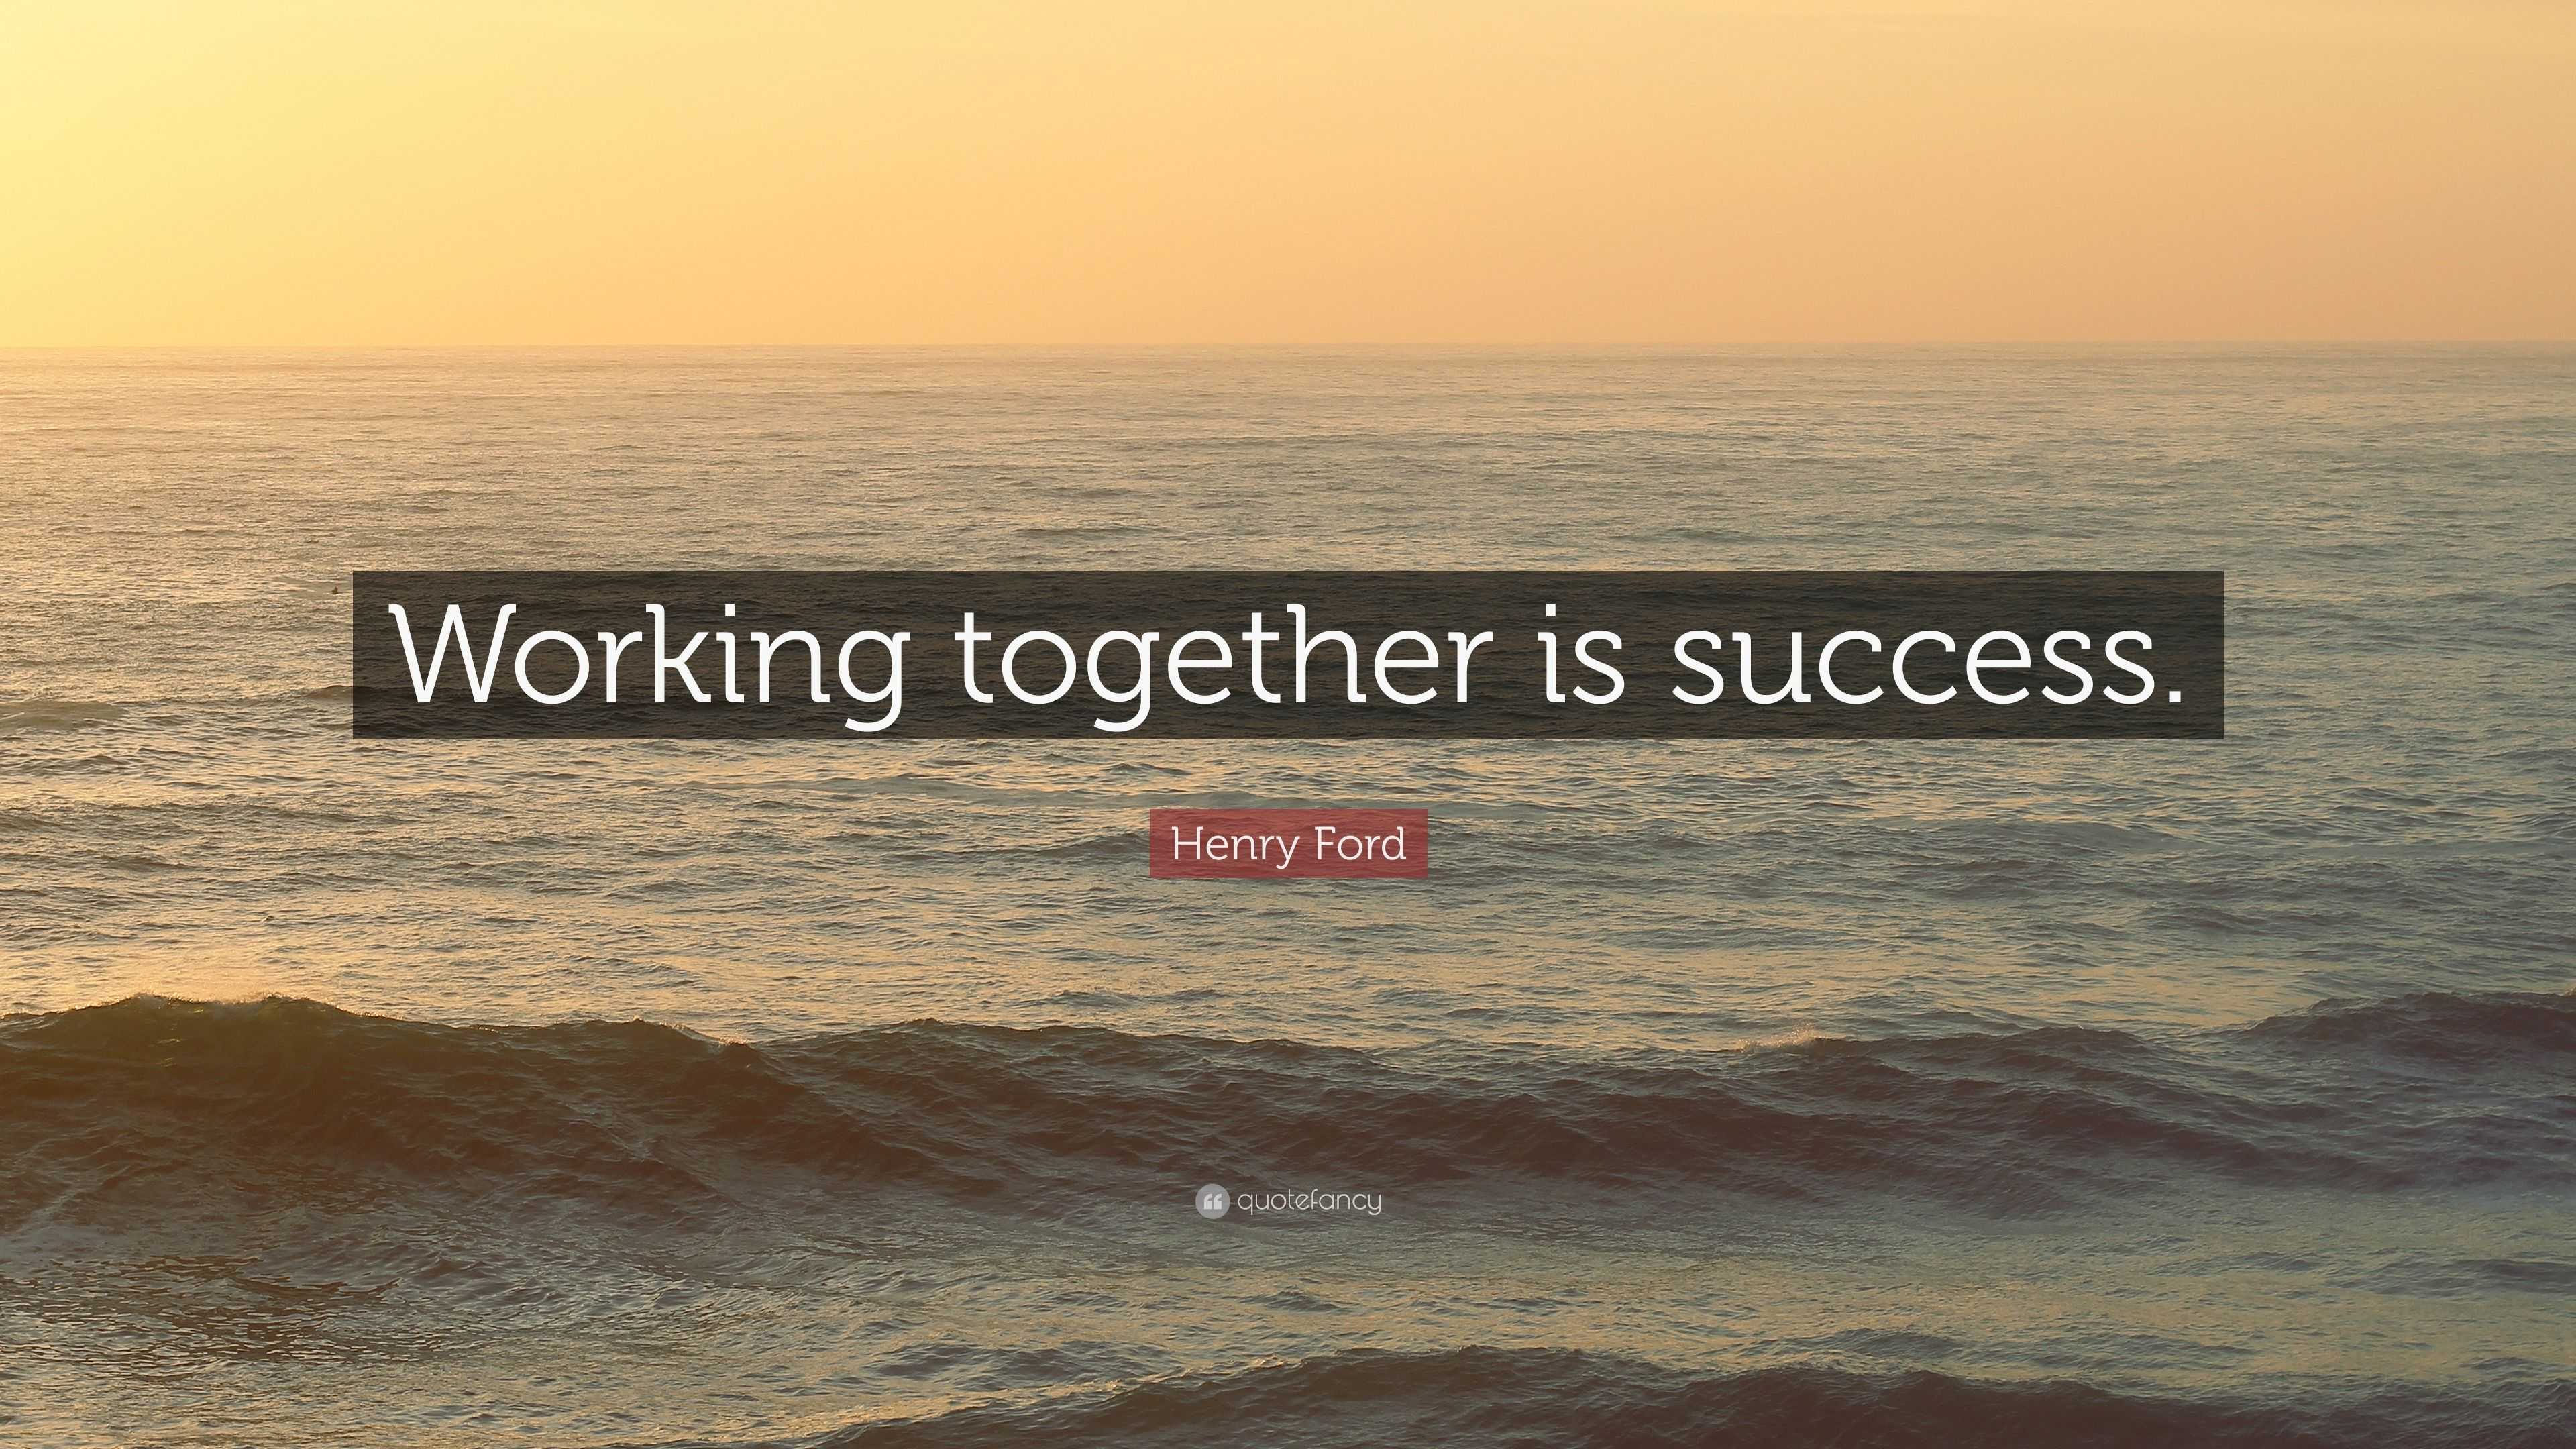 4707817 Henry Ford Quote Working Together Is Success 